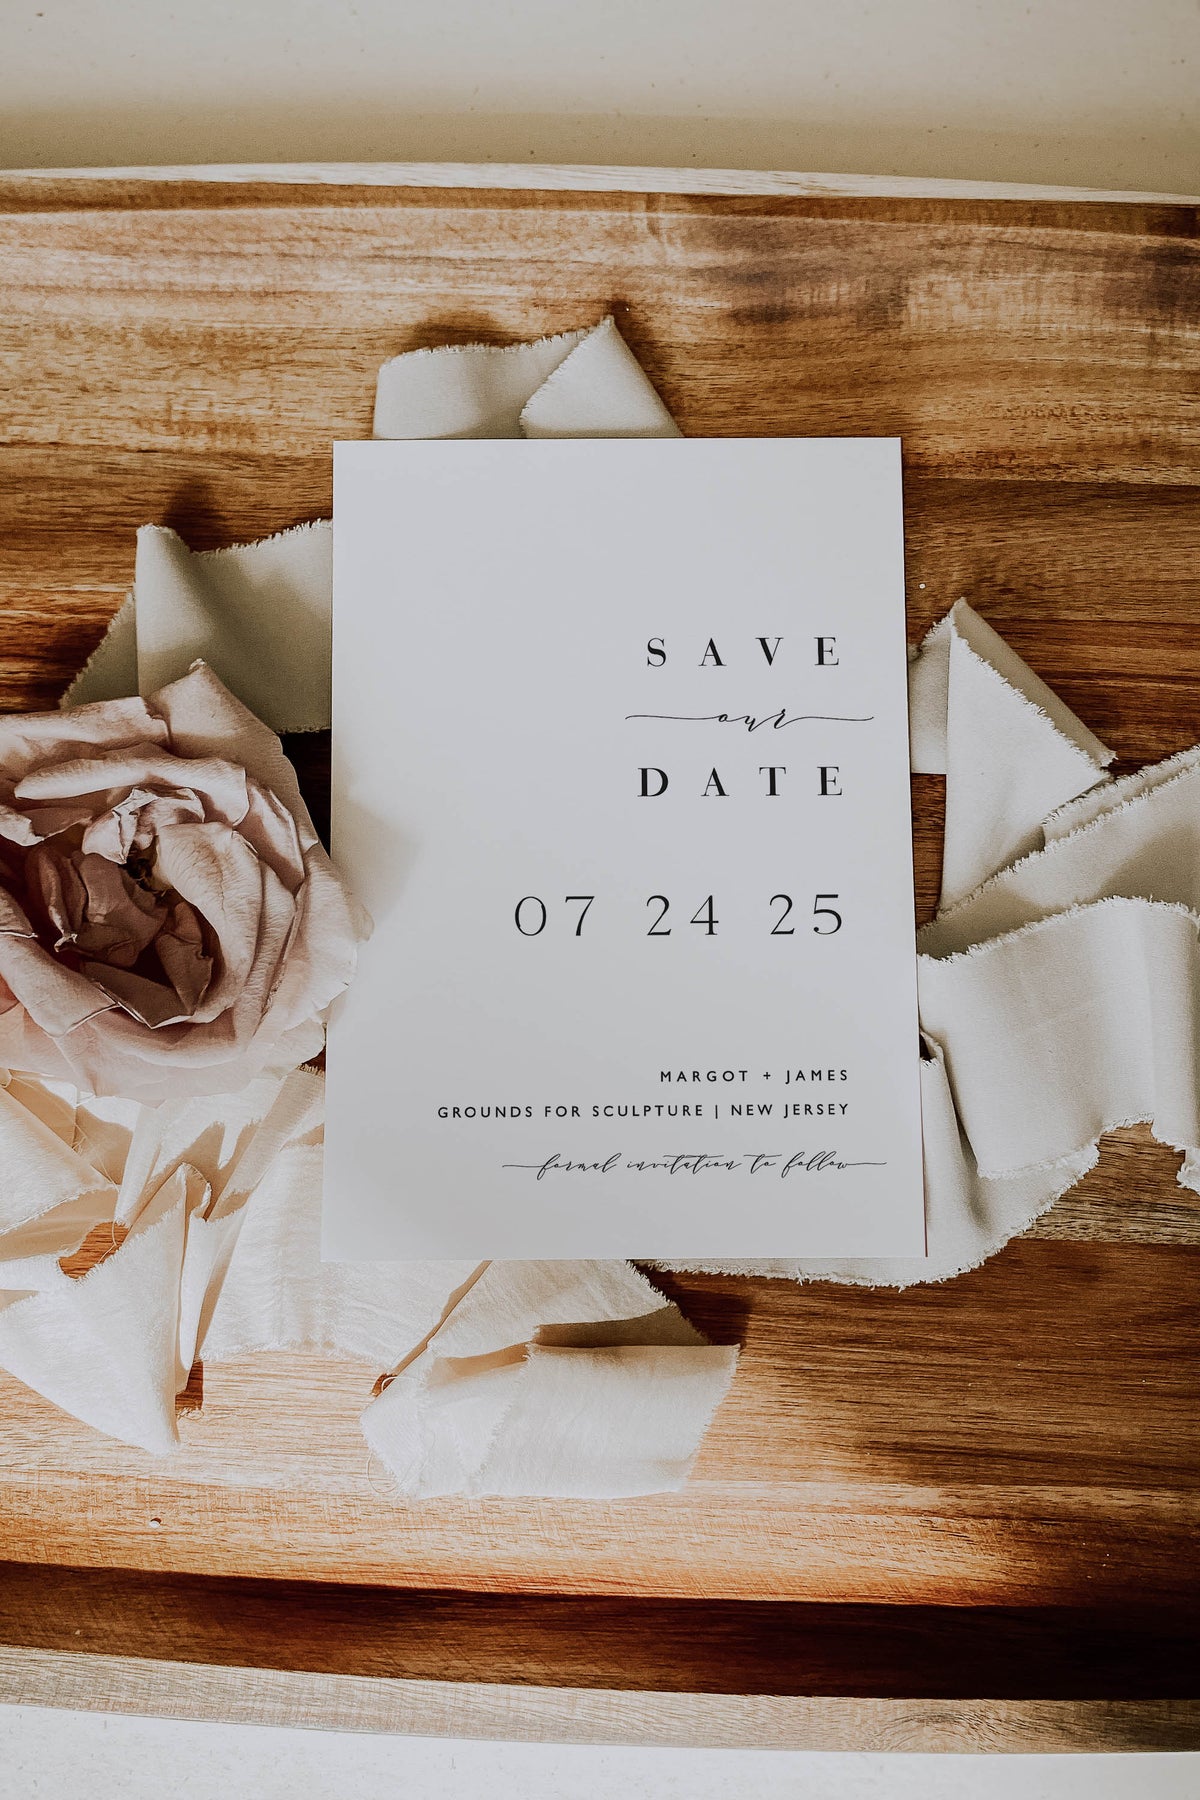 Simple Save the Date Card, Save the Date Postcard, Modern Save the